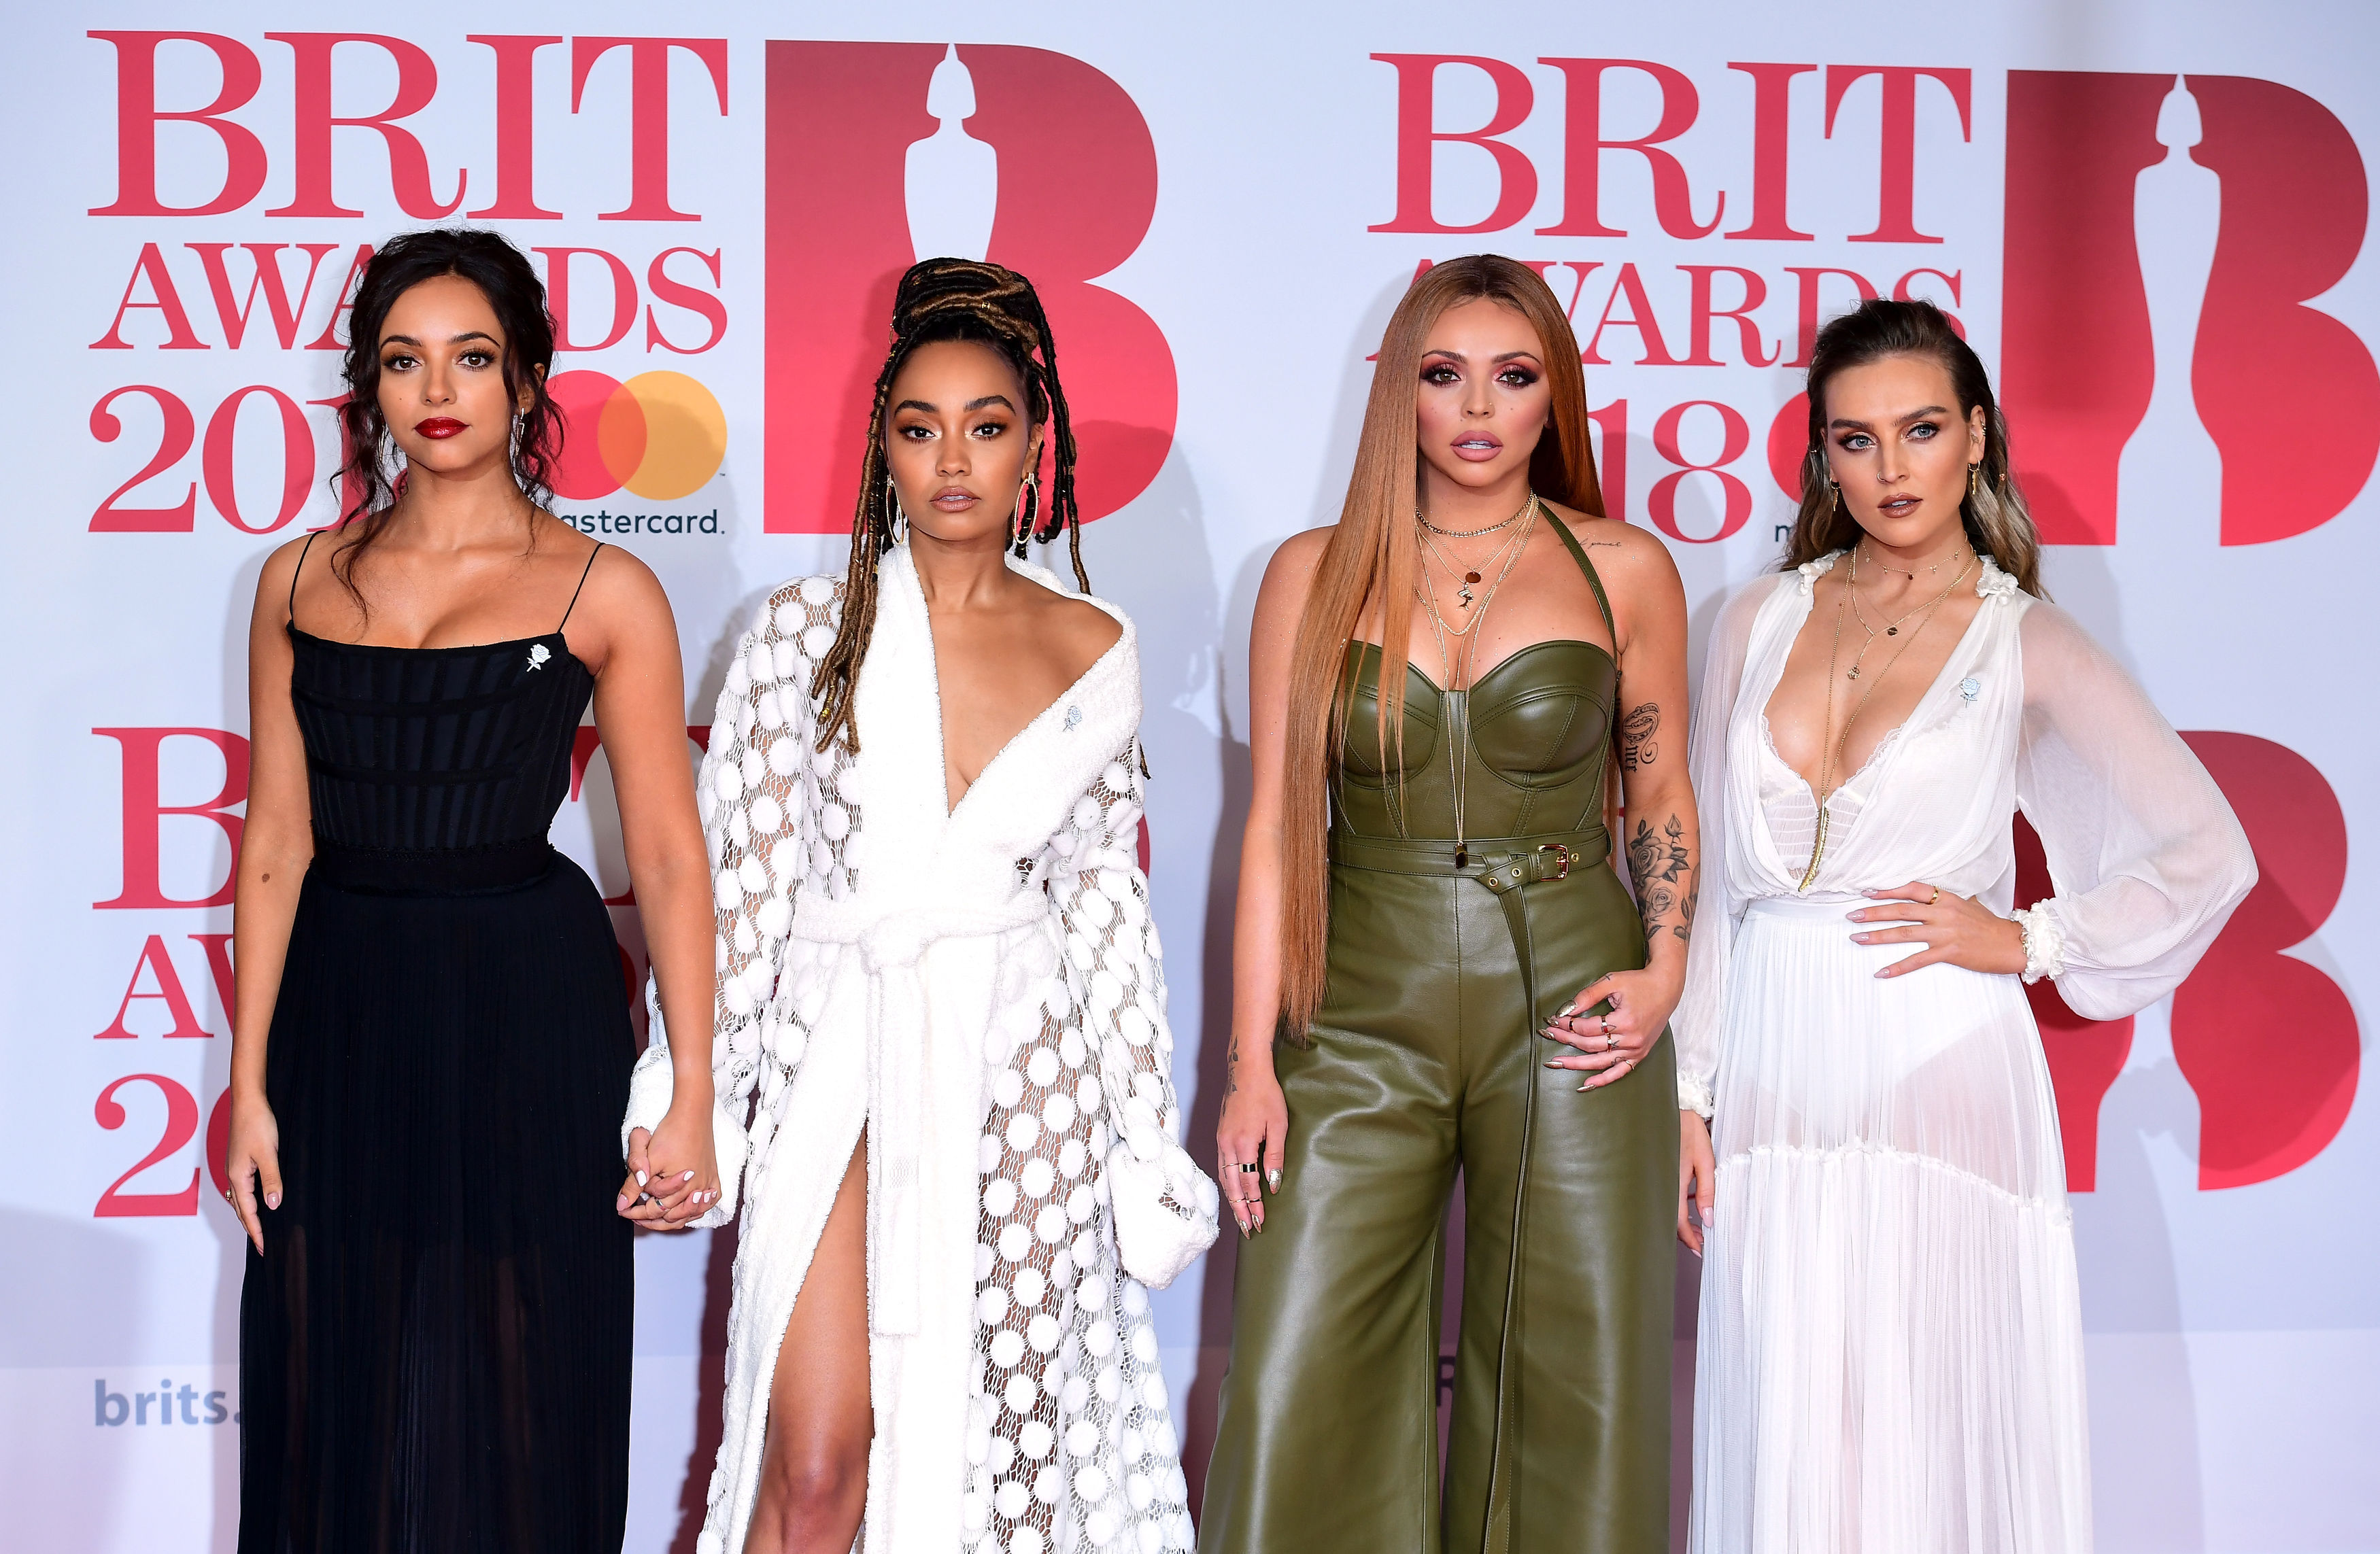 Little Mix's Perrie Edwards, Jesy Nelson, Leigh-Anne Pinnock and Jade Thirlwall arrive (Ian West/PA) 